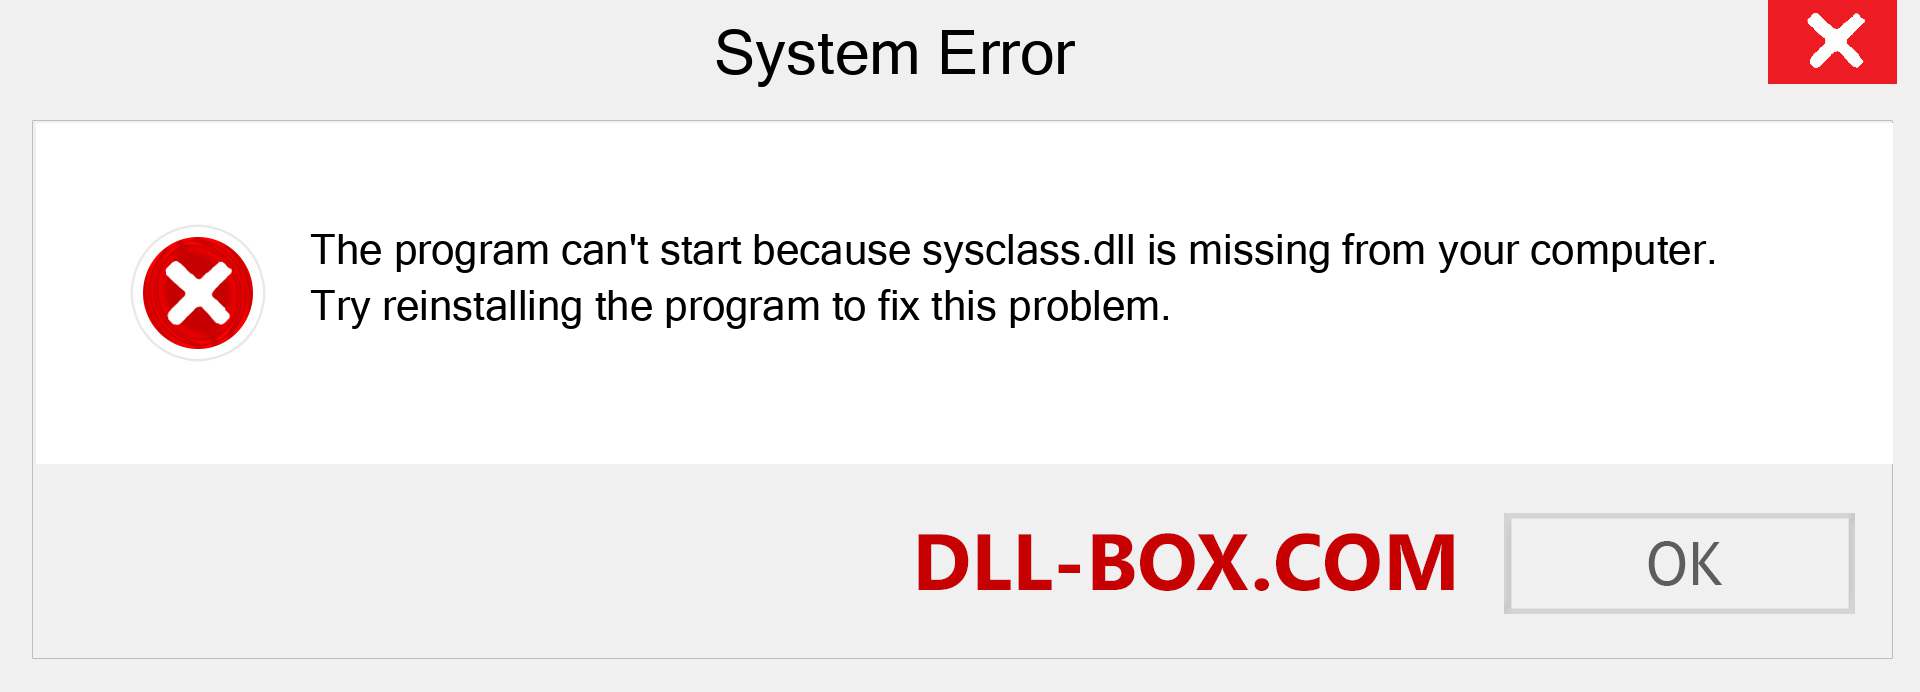  sysclass.dll file is missing?. Download for Windows 7, 8, 10 - Fix  sysclass dll Missing Error on Windows, photos, images